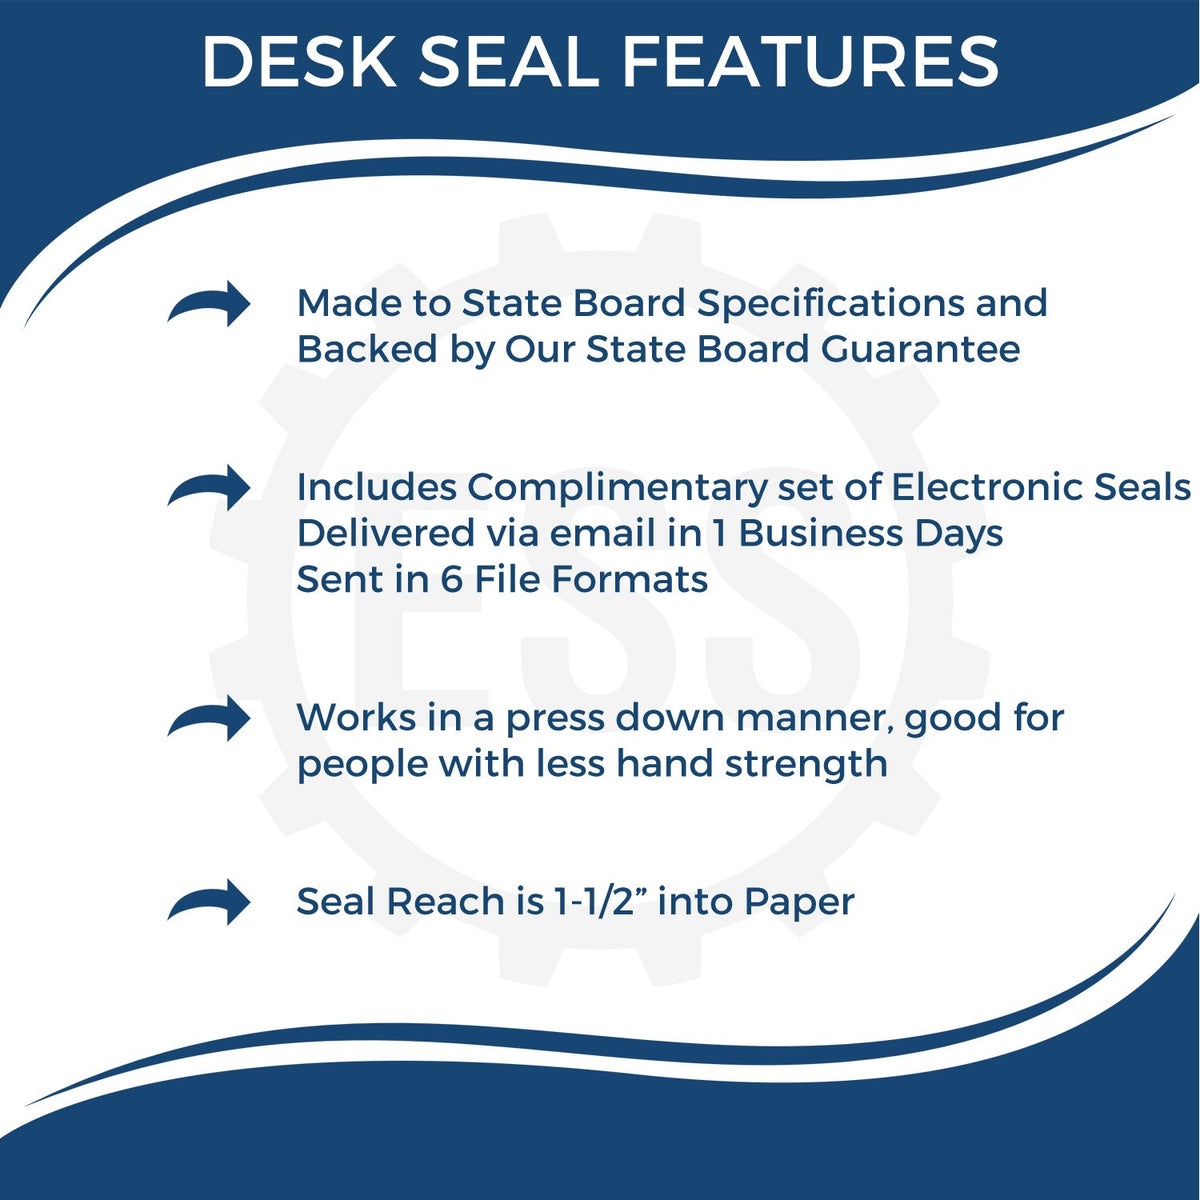 A picture of an infographic highlighting the selling points for the Florida Desk Surveyor Seal Embosser